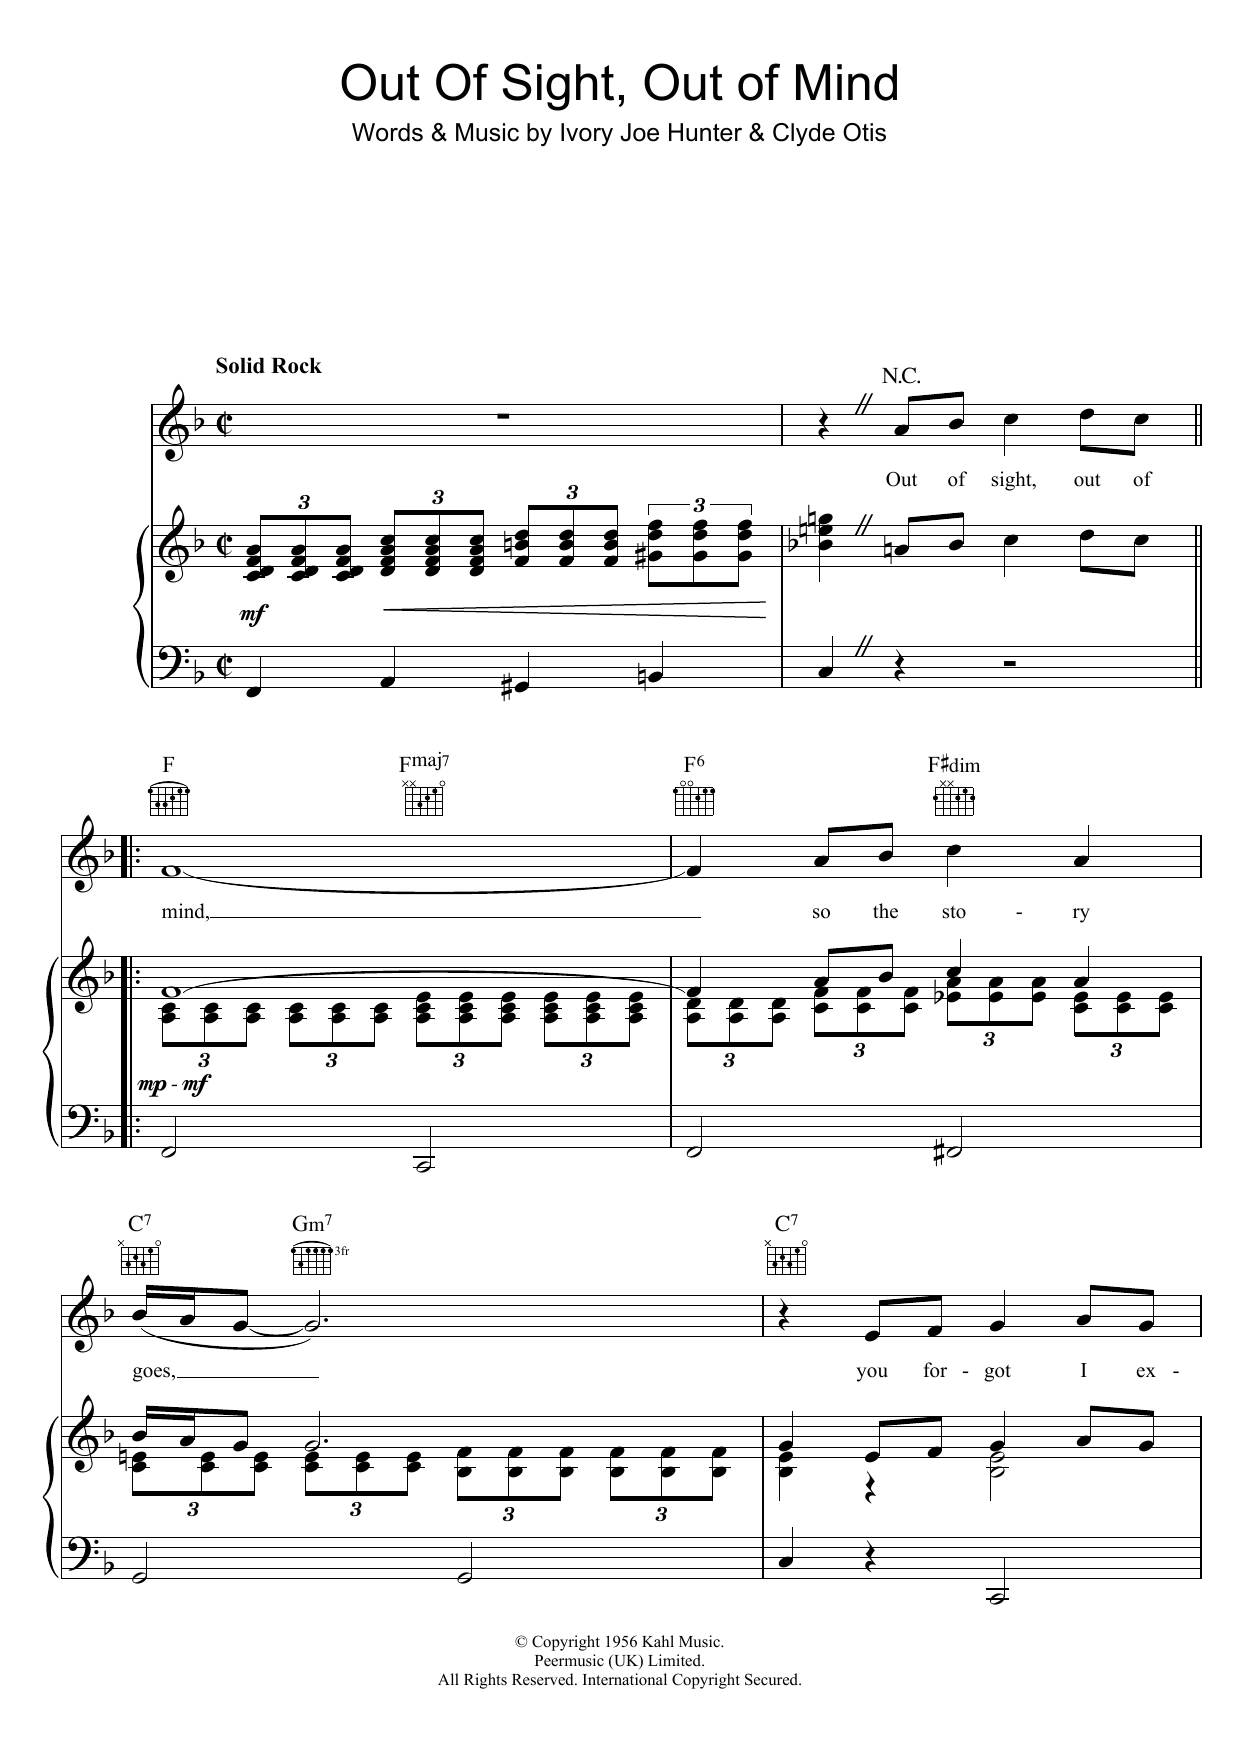 Download The Five Keys Out Of Sight, Out Of Mind Sheet Music